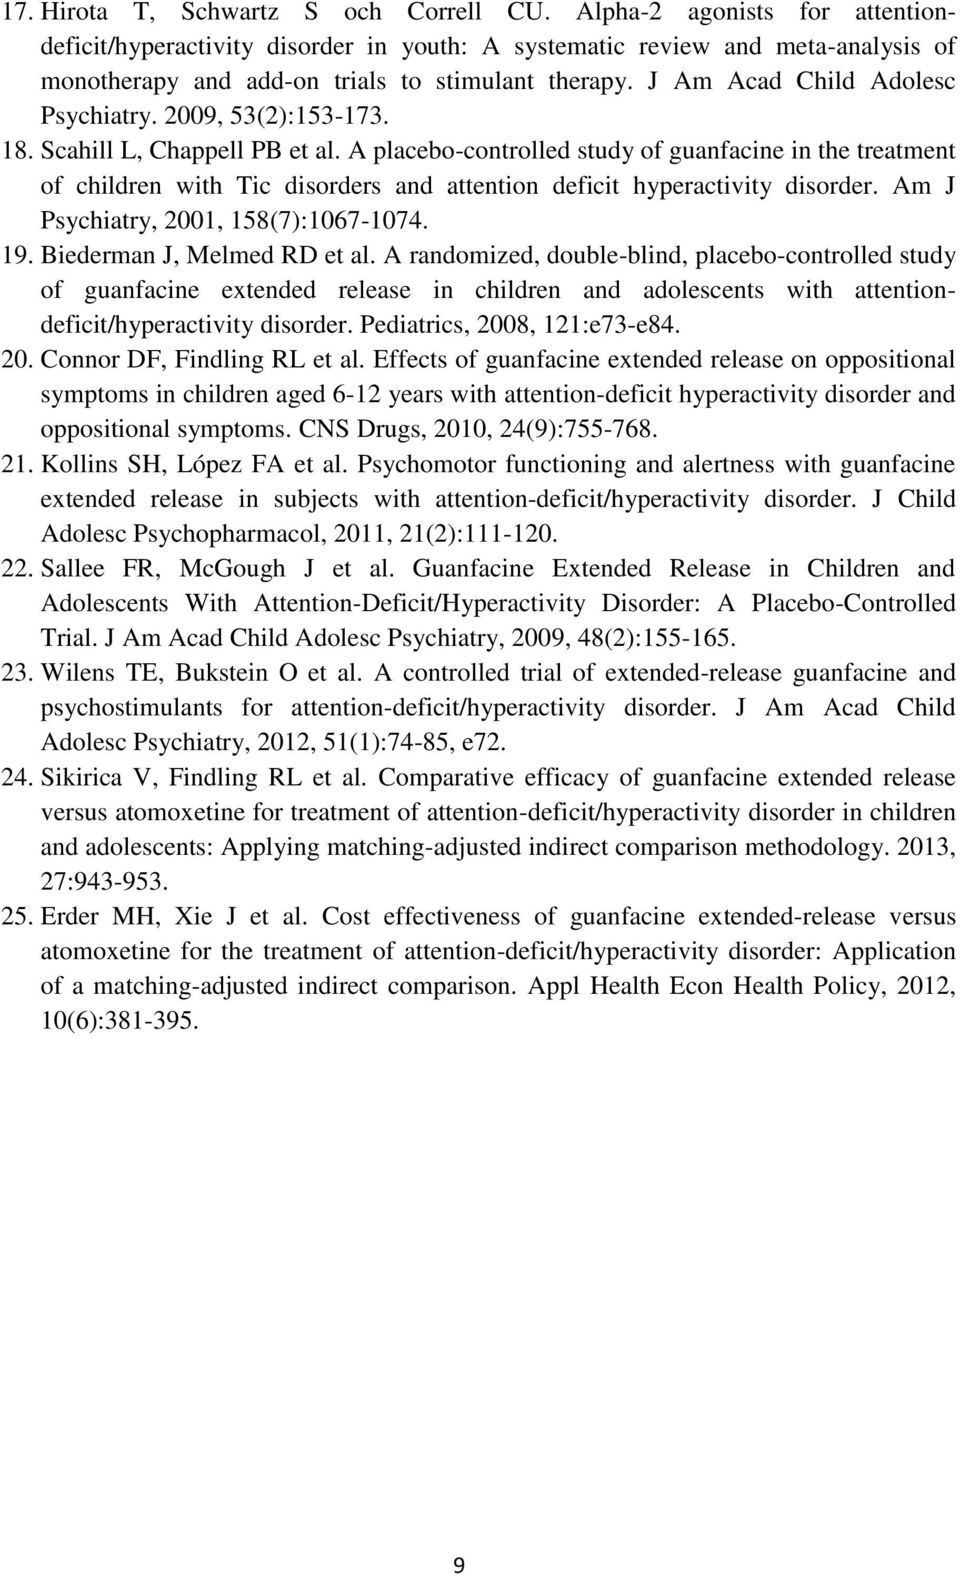 2009, 53(2):153-173. 18. Scahill L, Chappell PB et al. A placebo-controlled study of guanfacine in the treatment of children with Tic disorders and attention deficit hyperactivity disorder.